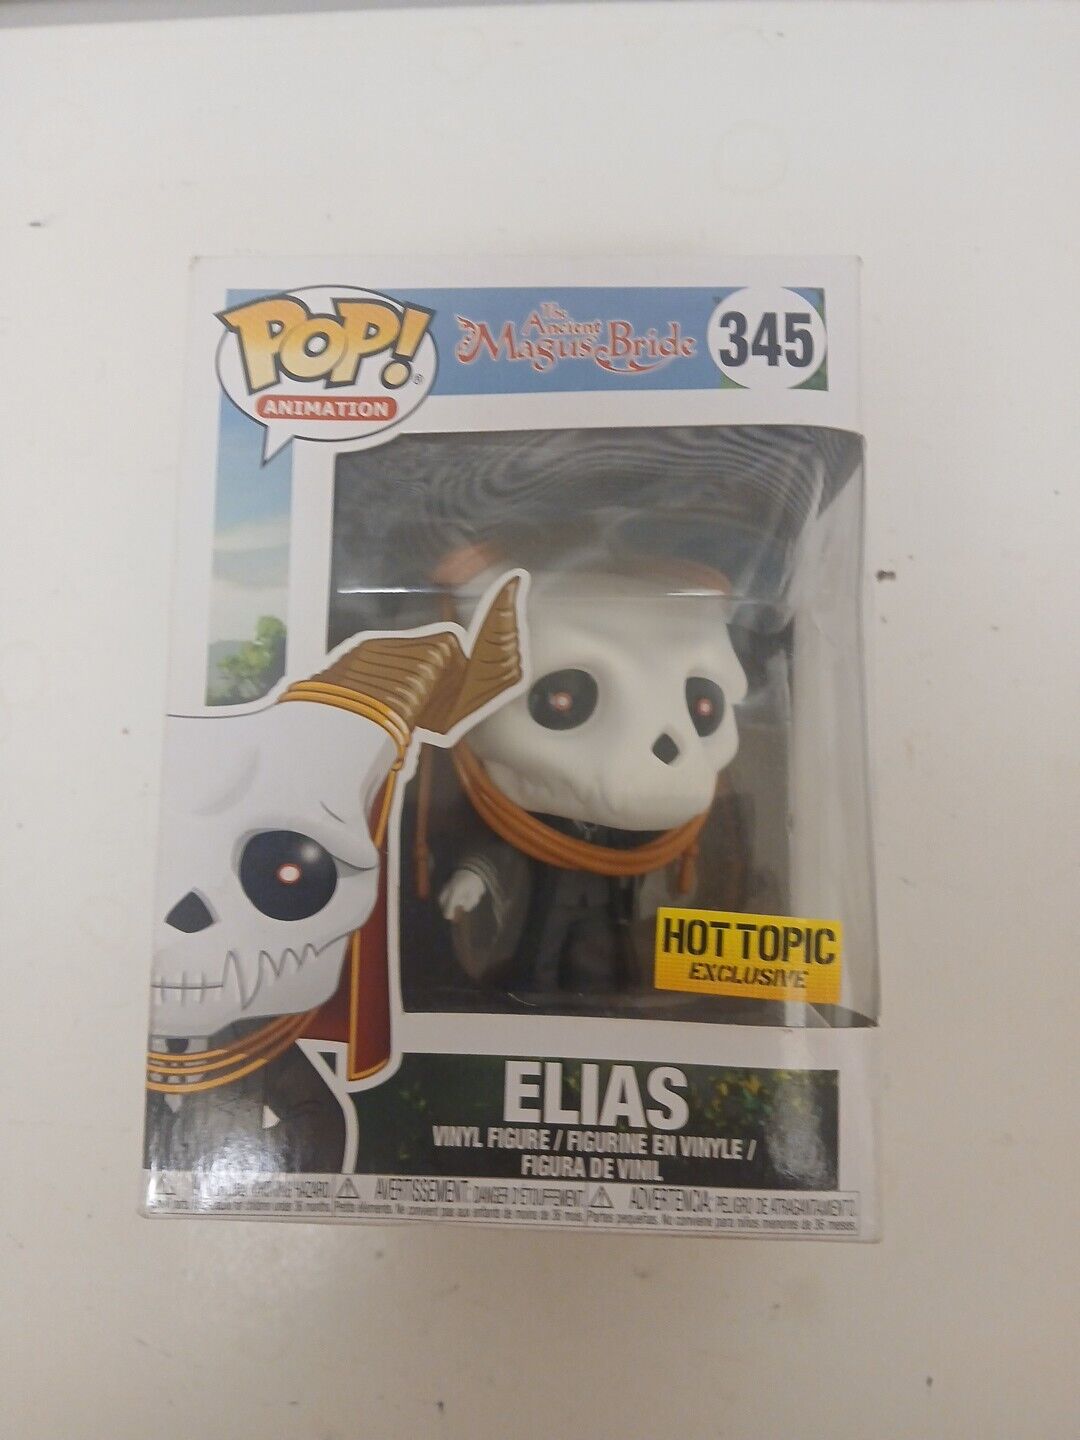 Elias The Ancient Magus Bride Funko Pop Animation #345 Hot Topic Exclusive